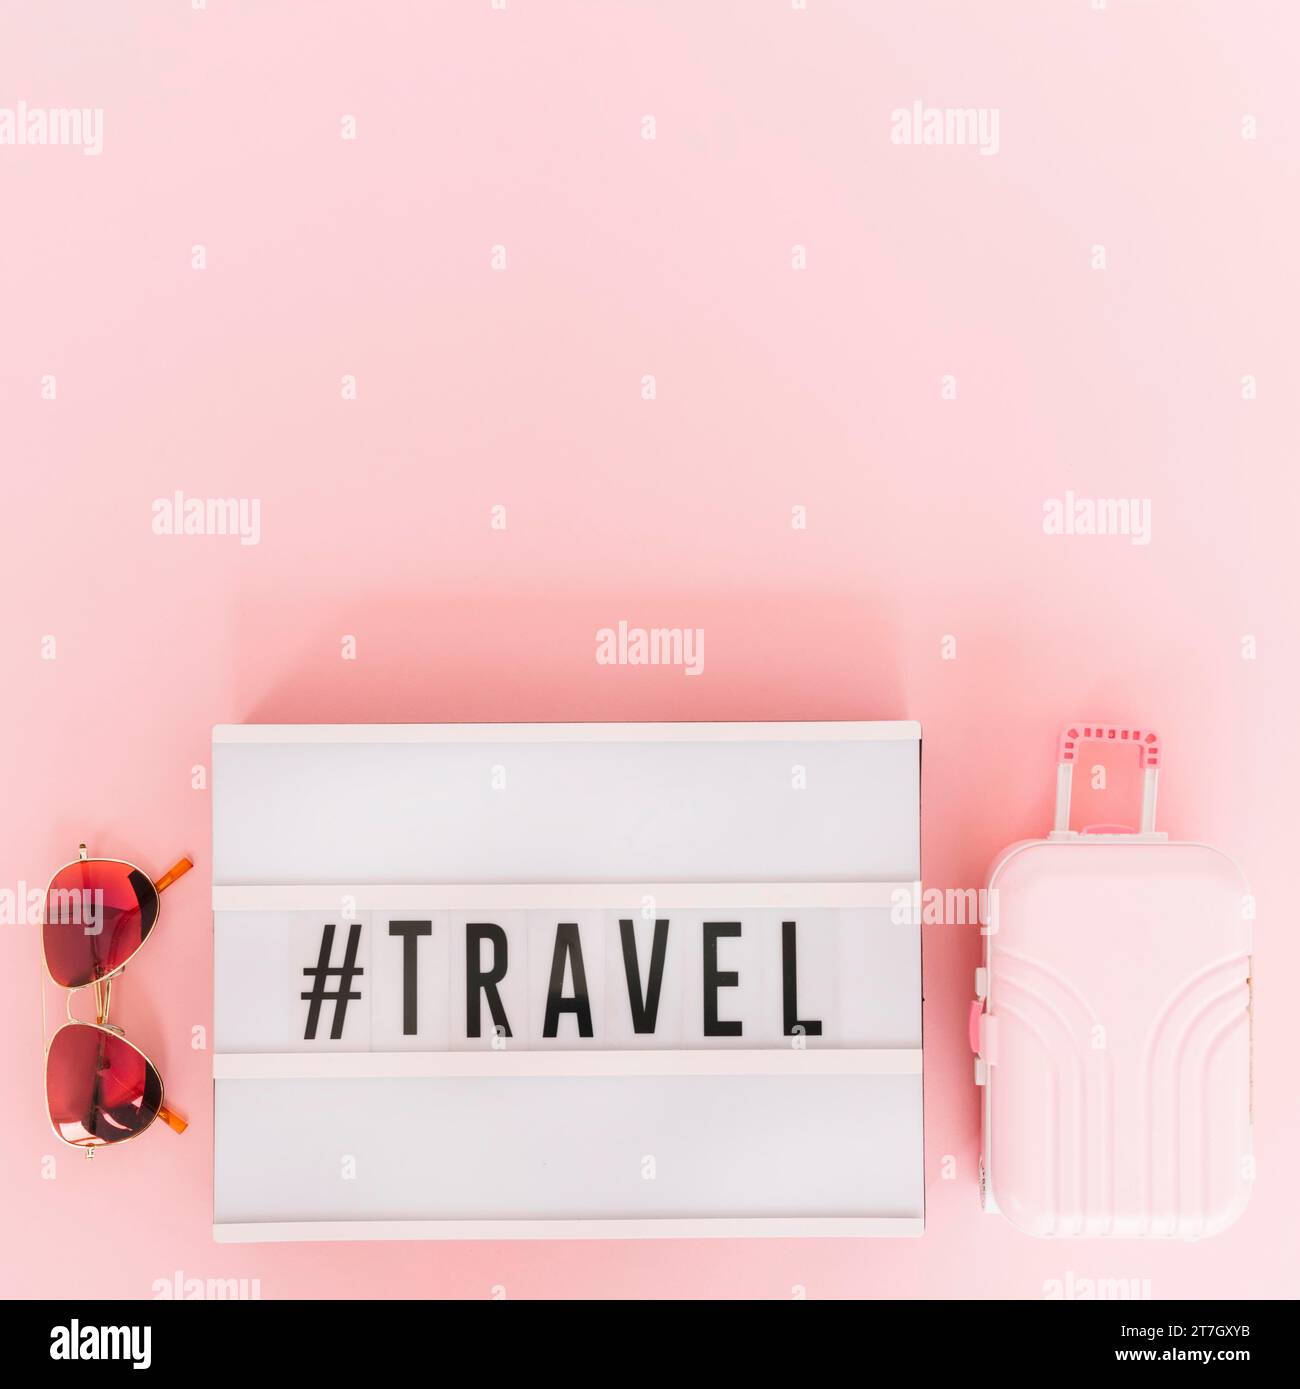 Hashtag with travel text lightbox with sunglasses miniature travel bag pink background Stock Photo